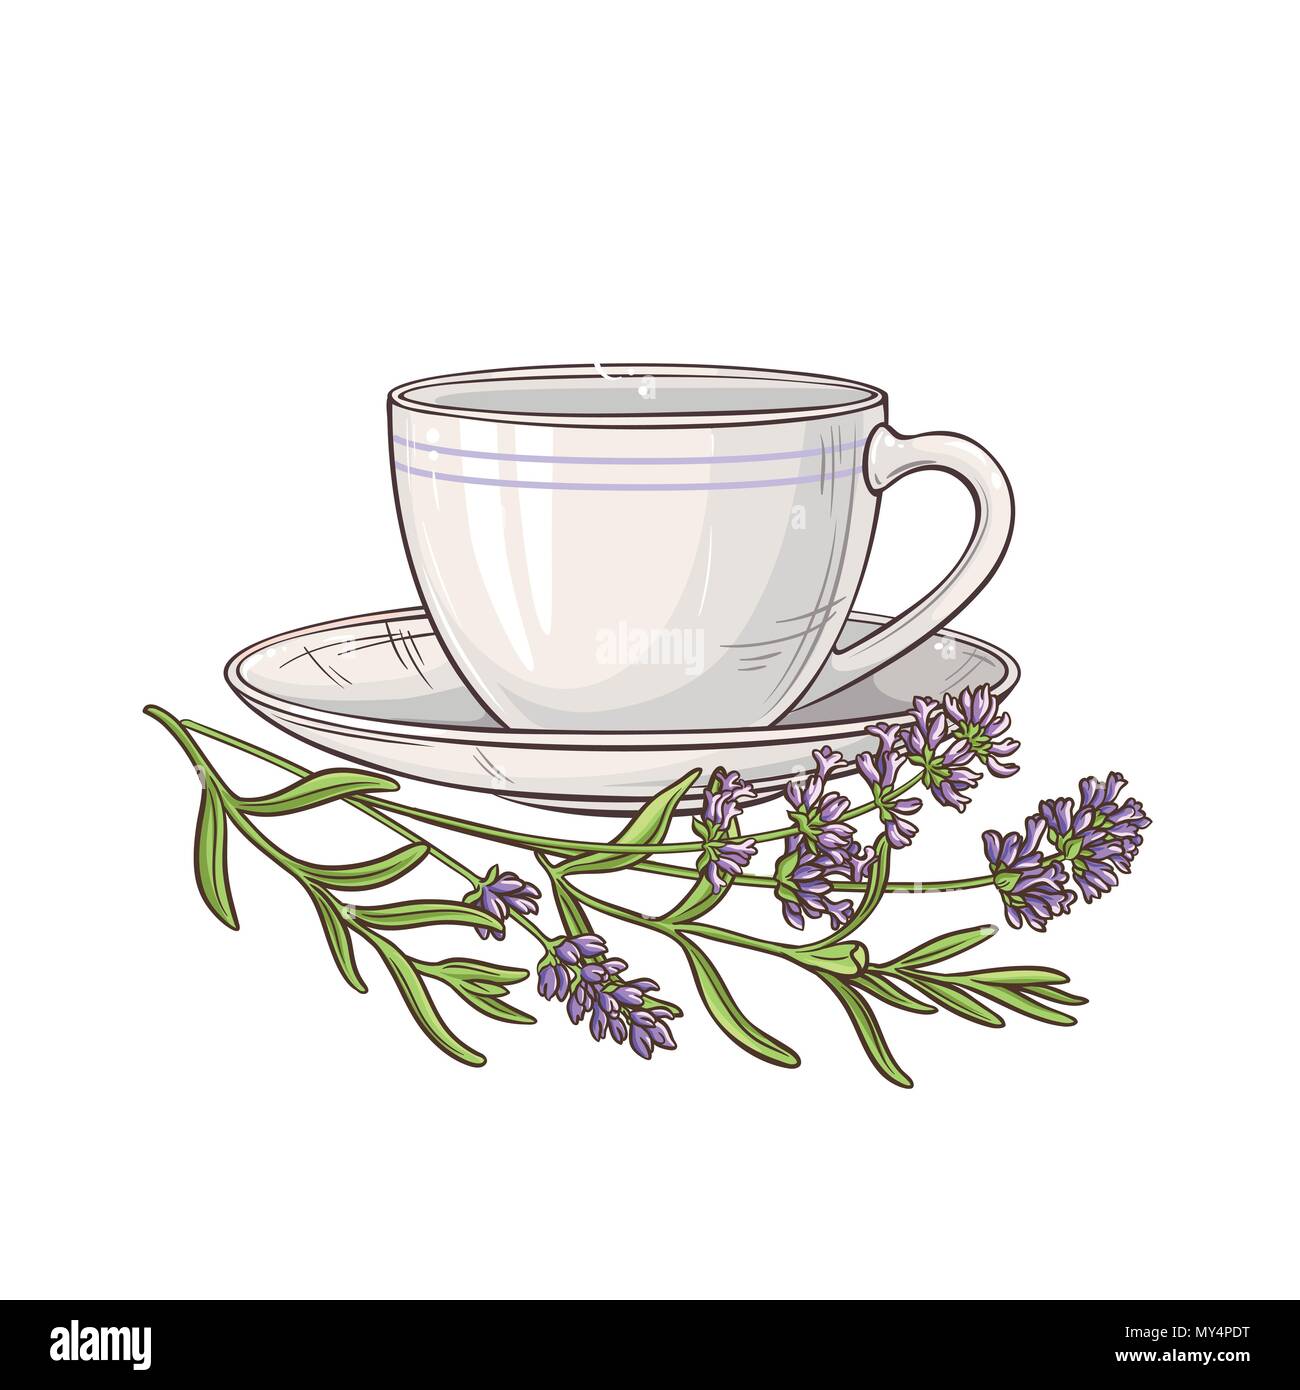 cup of lavender tea illustration on white background Stock Vector